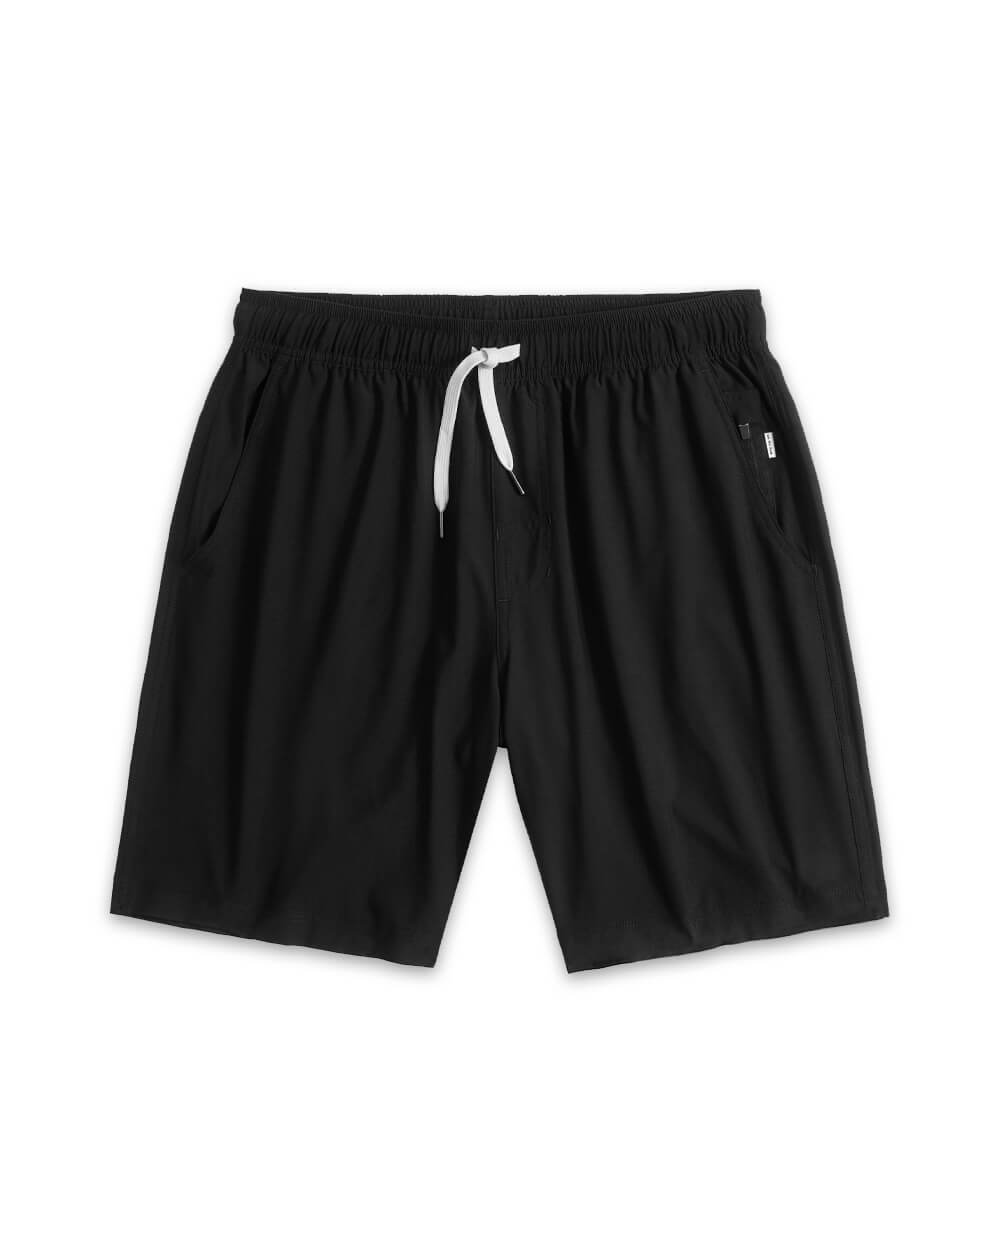 Essential Athletic Shorts-Black-Front